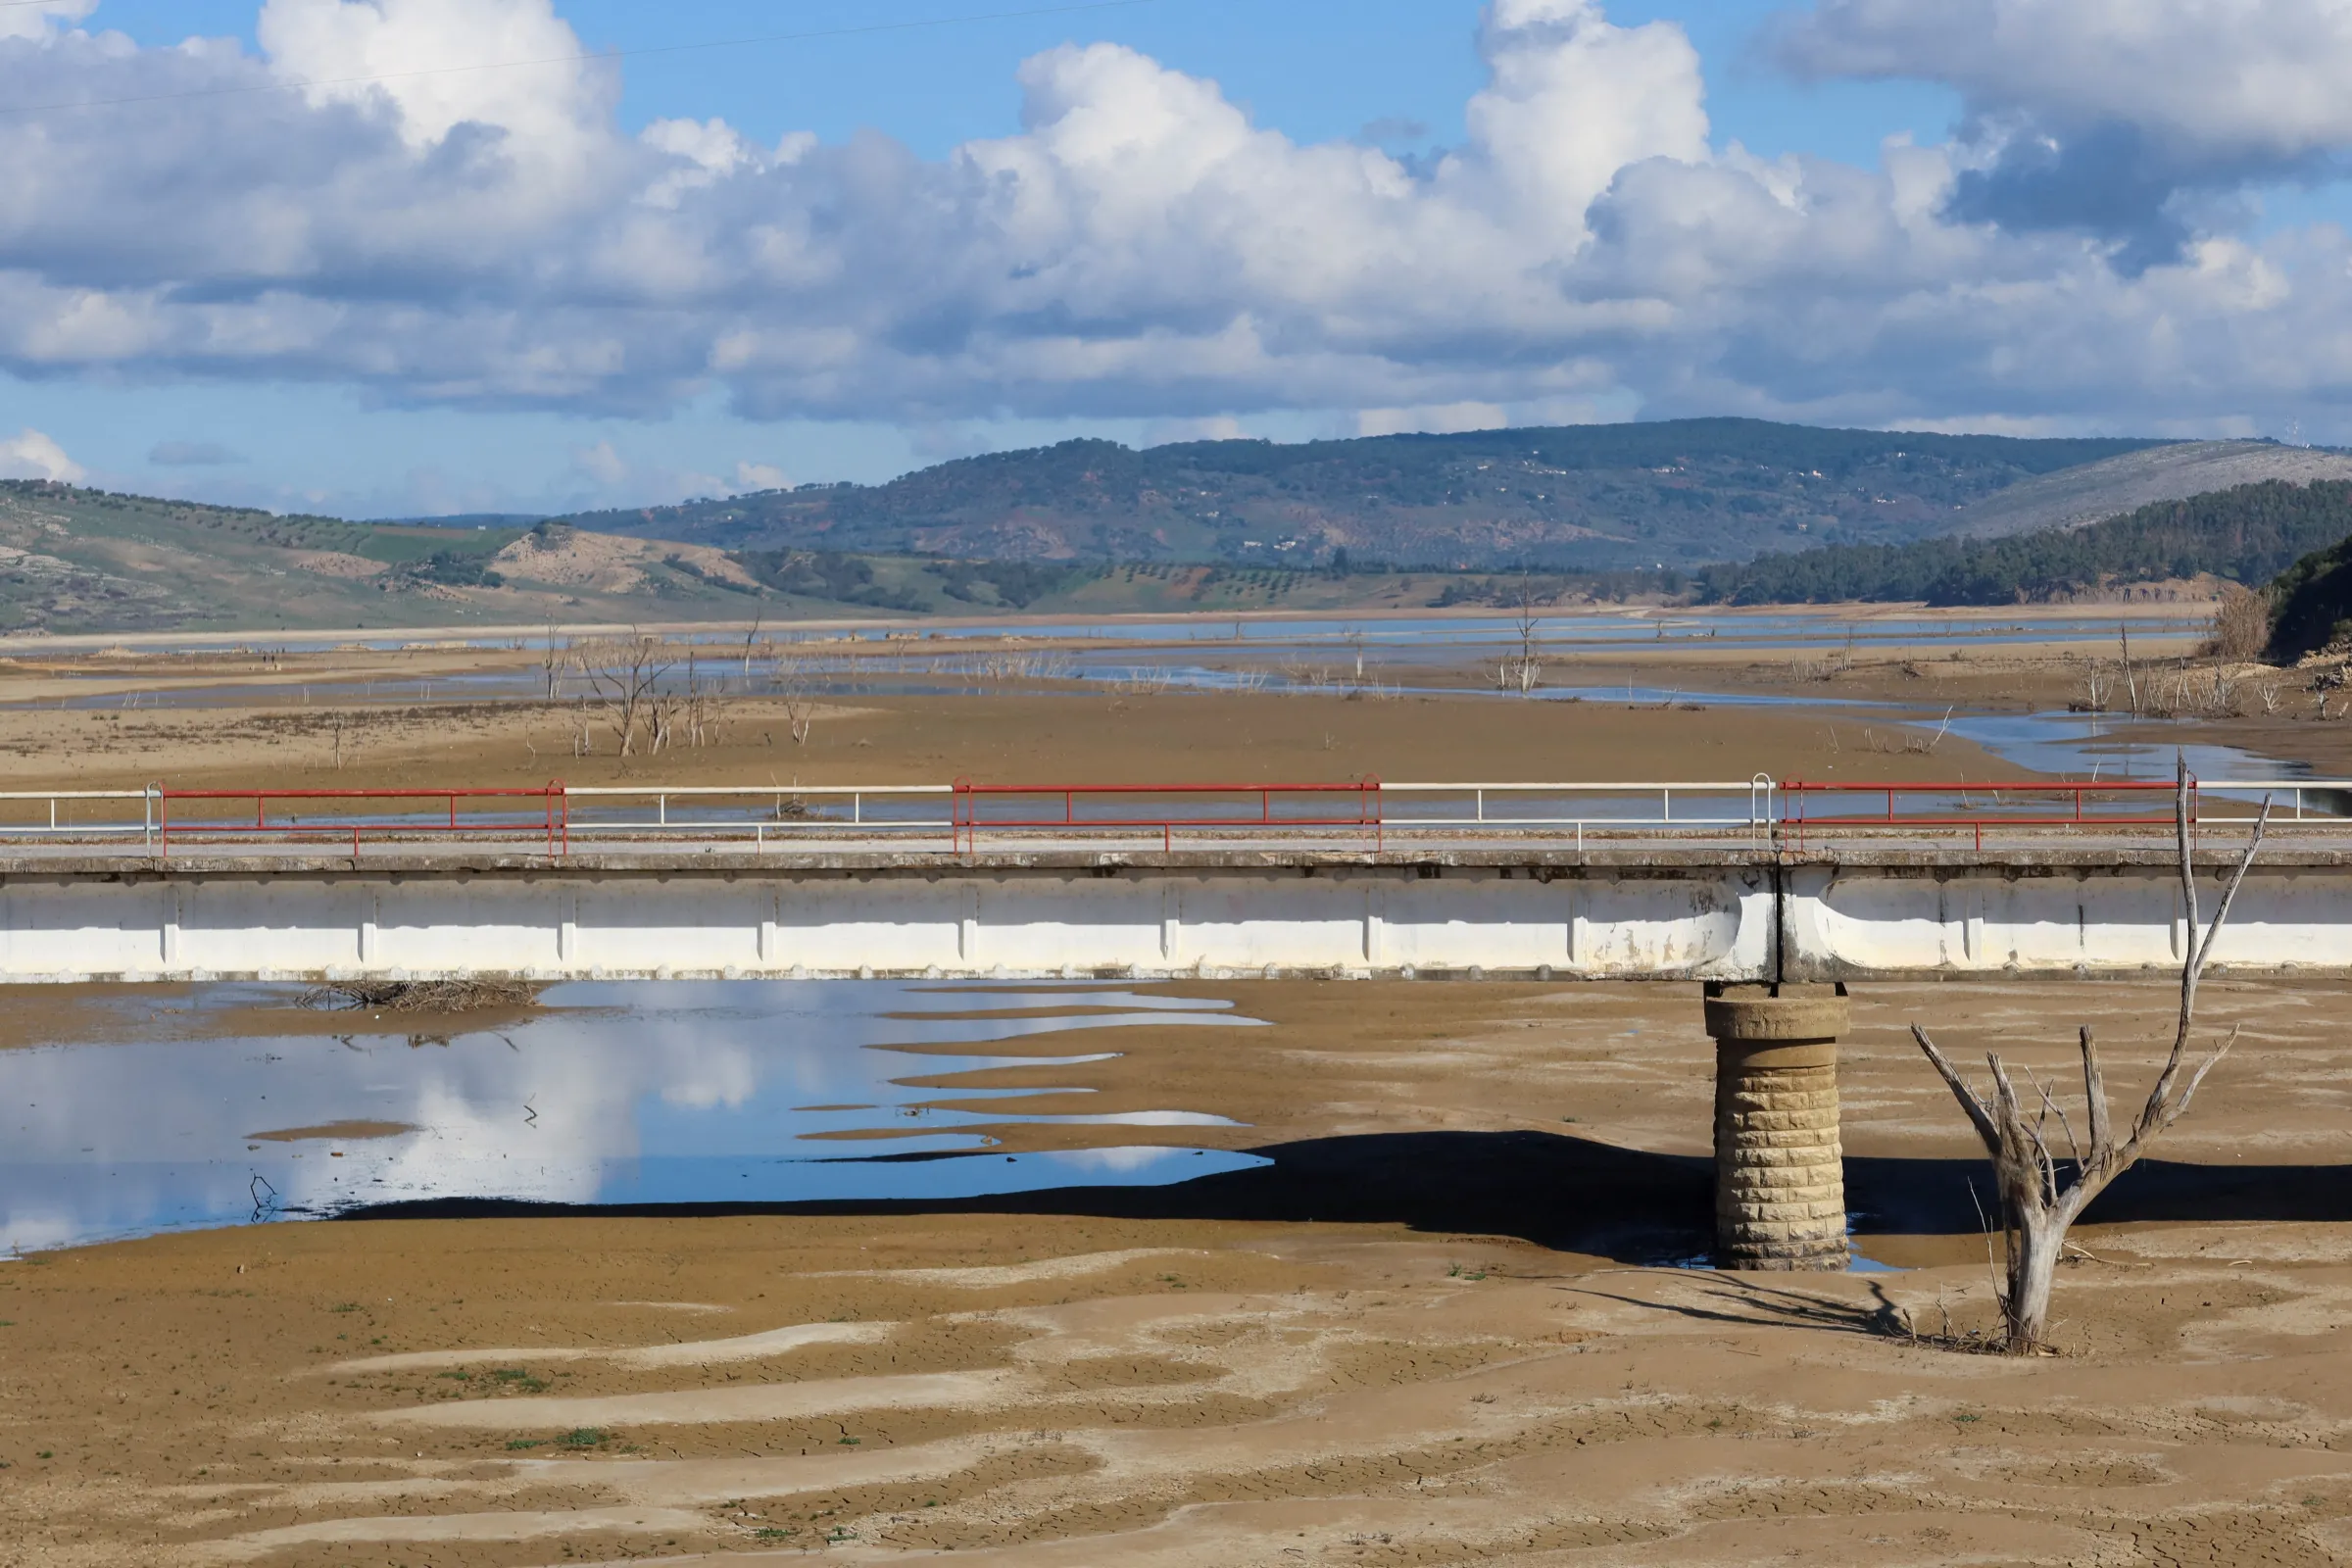 A view shows a bridge over Sidi El Barrak dam with depleted levels of water, in Nafza, west of the capital Tunis, Tunisia, January 7, 2023. REUTERS/Jihed Abidellaoui